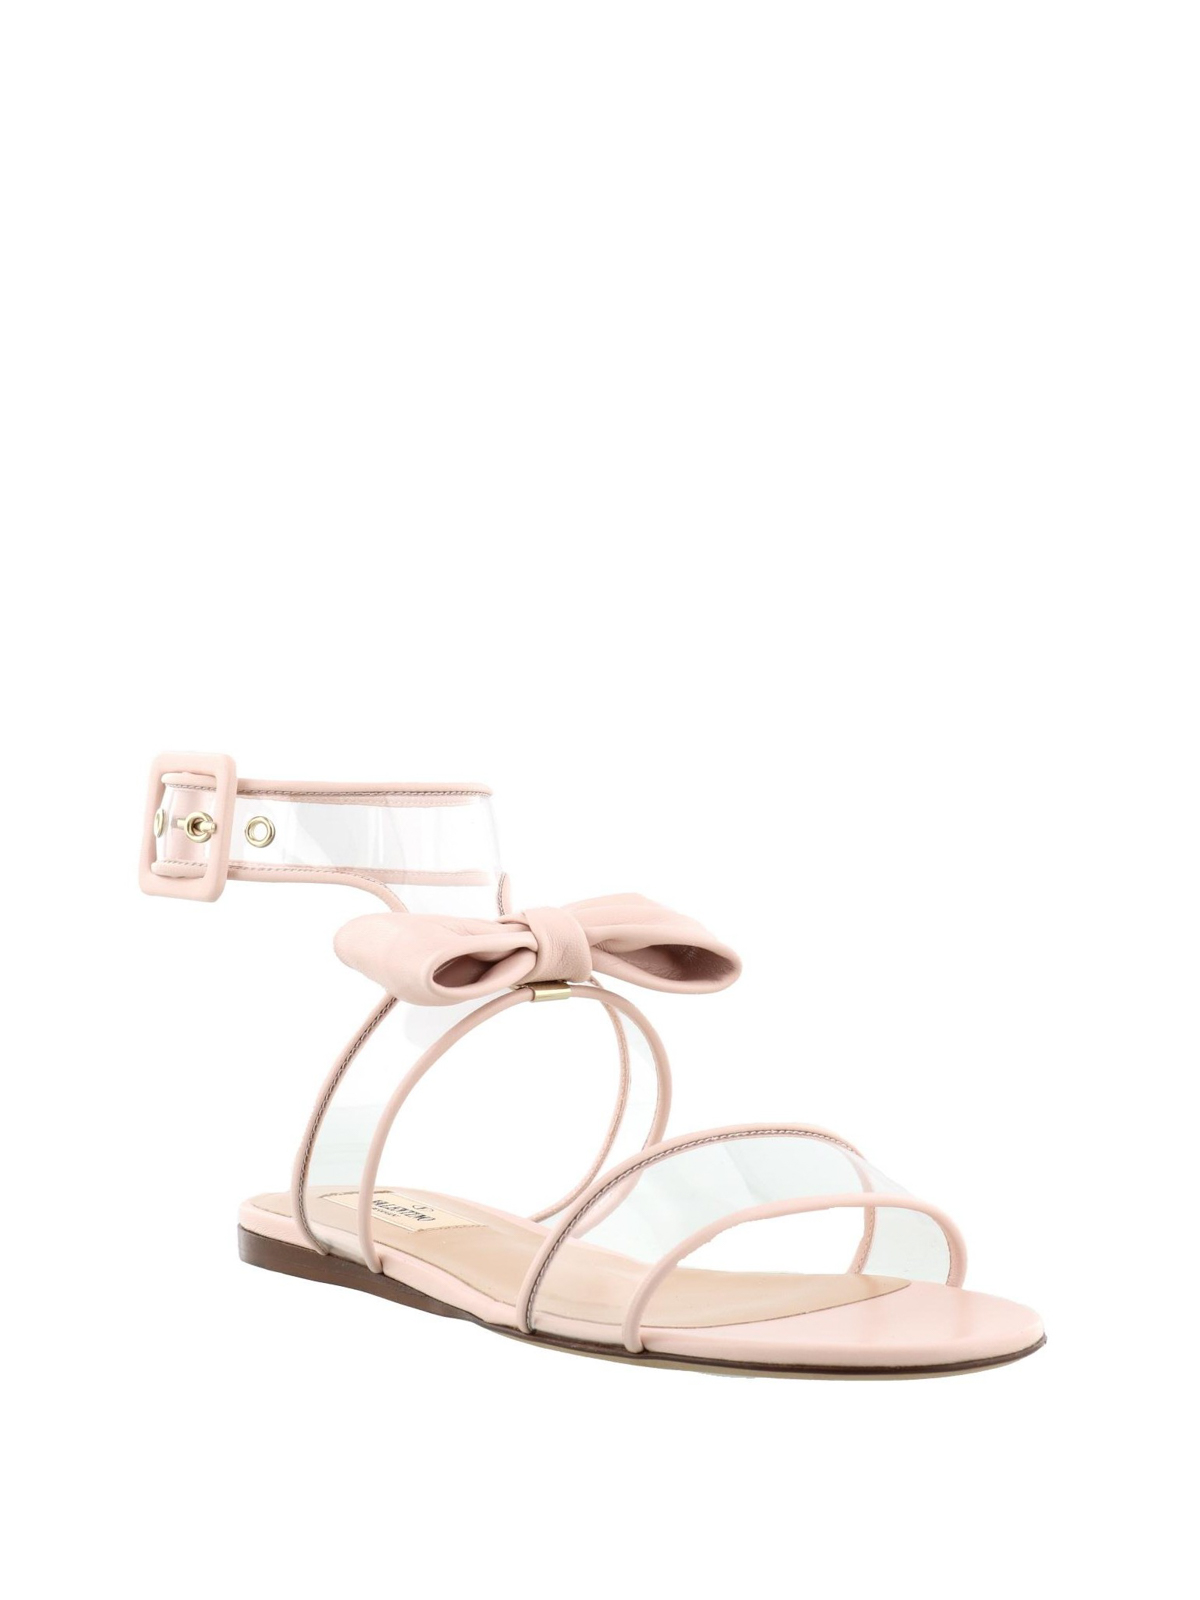 valentino dolly bow sandals